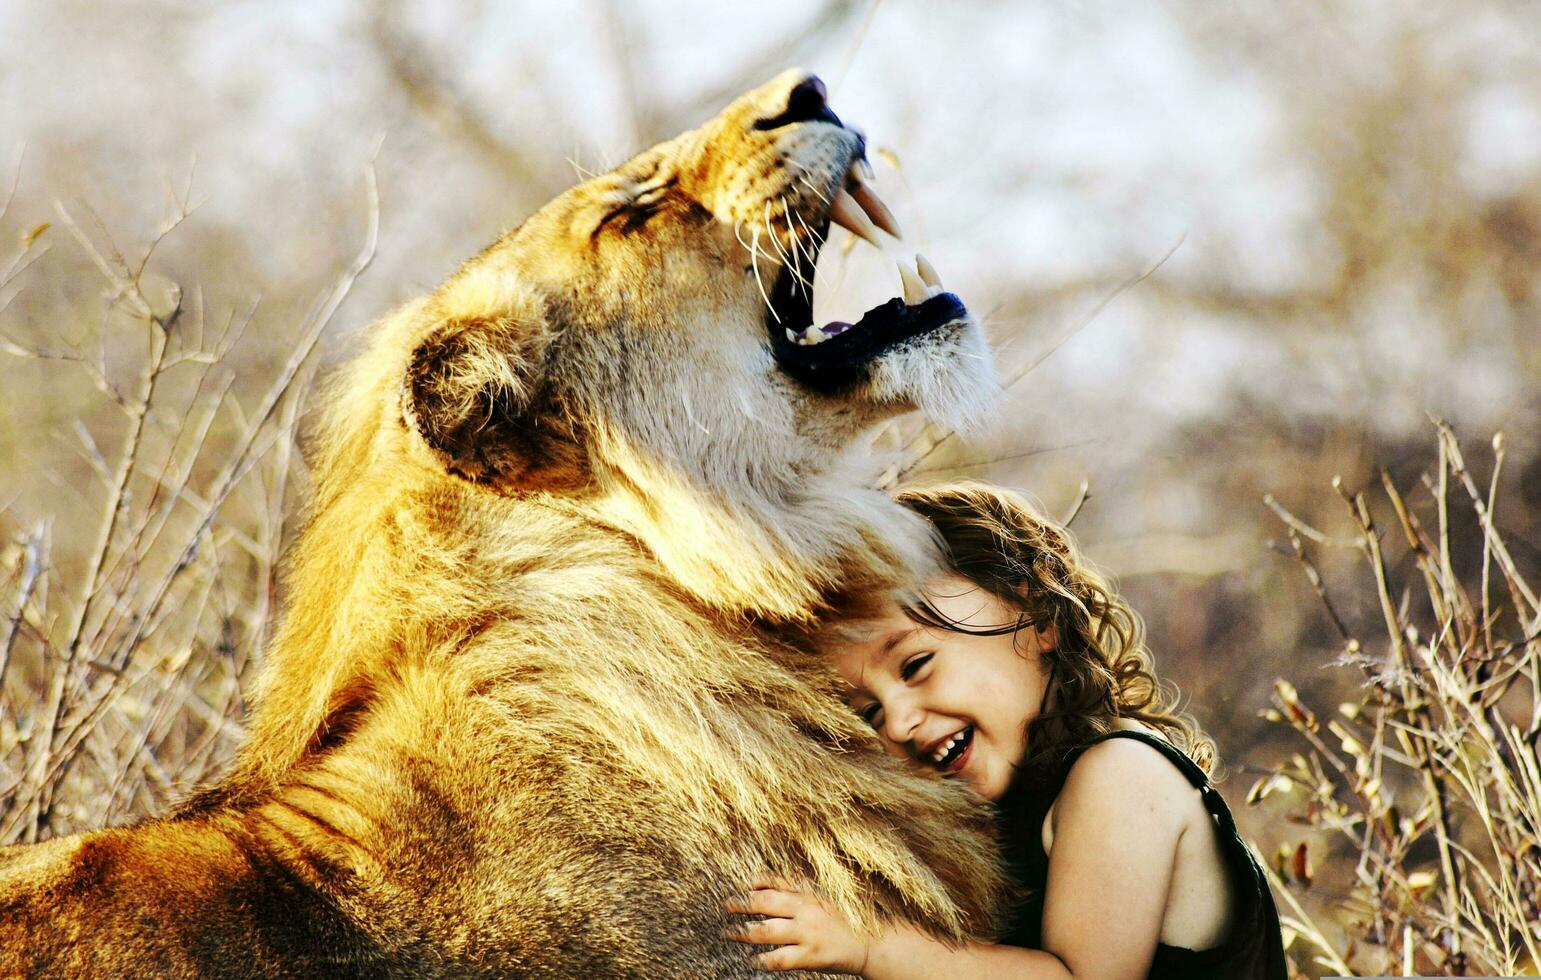 The baby loves the lion very much The lion and the baby love very much 2 people are happy photo